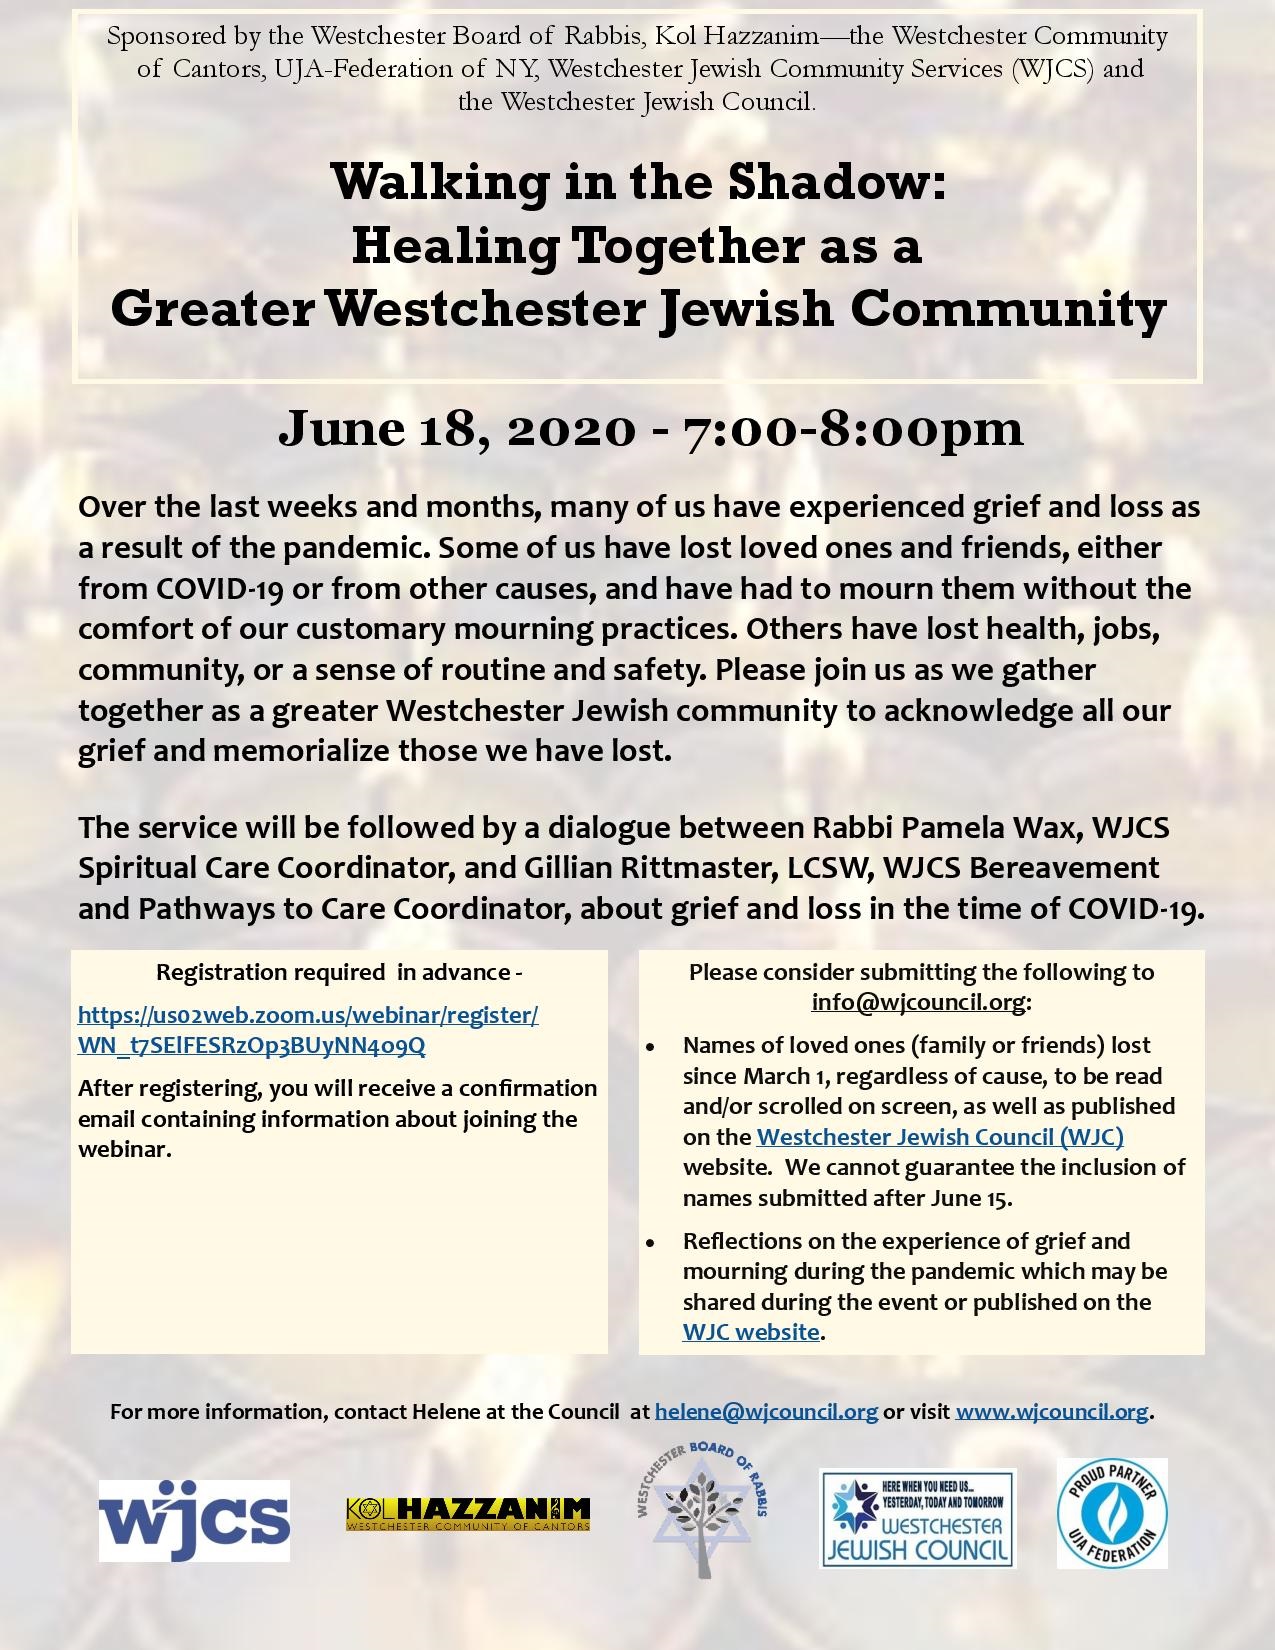 Westchester Memorial Service -  "Walking in the Shadow: Healing Together as a Greater Westchester Jewish Community"